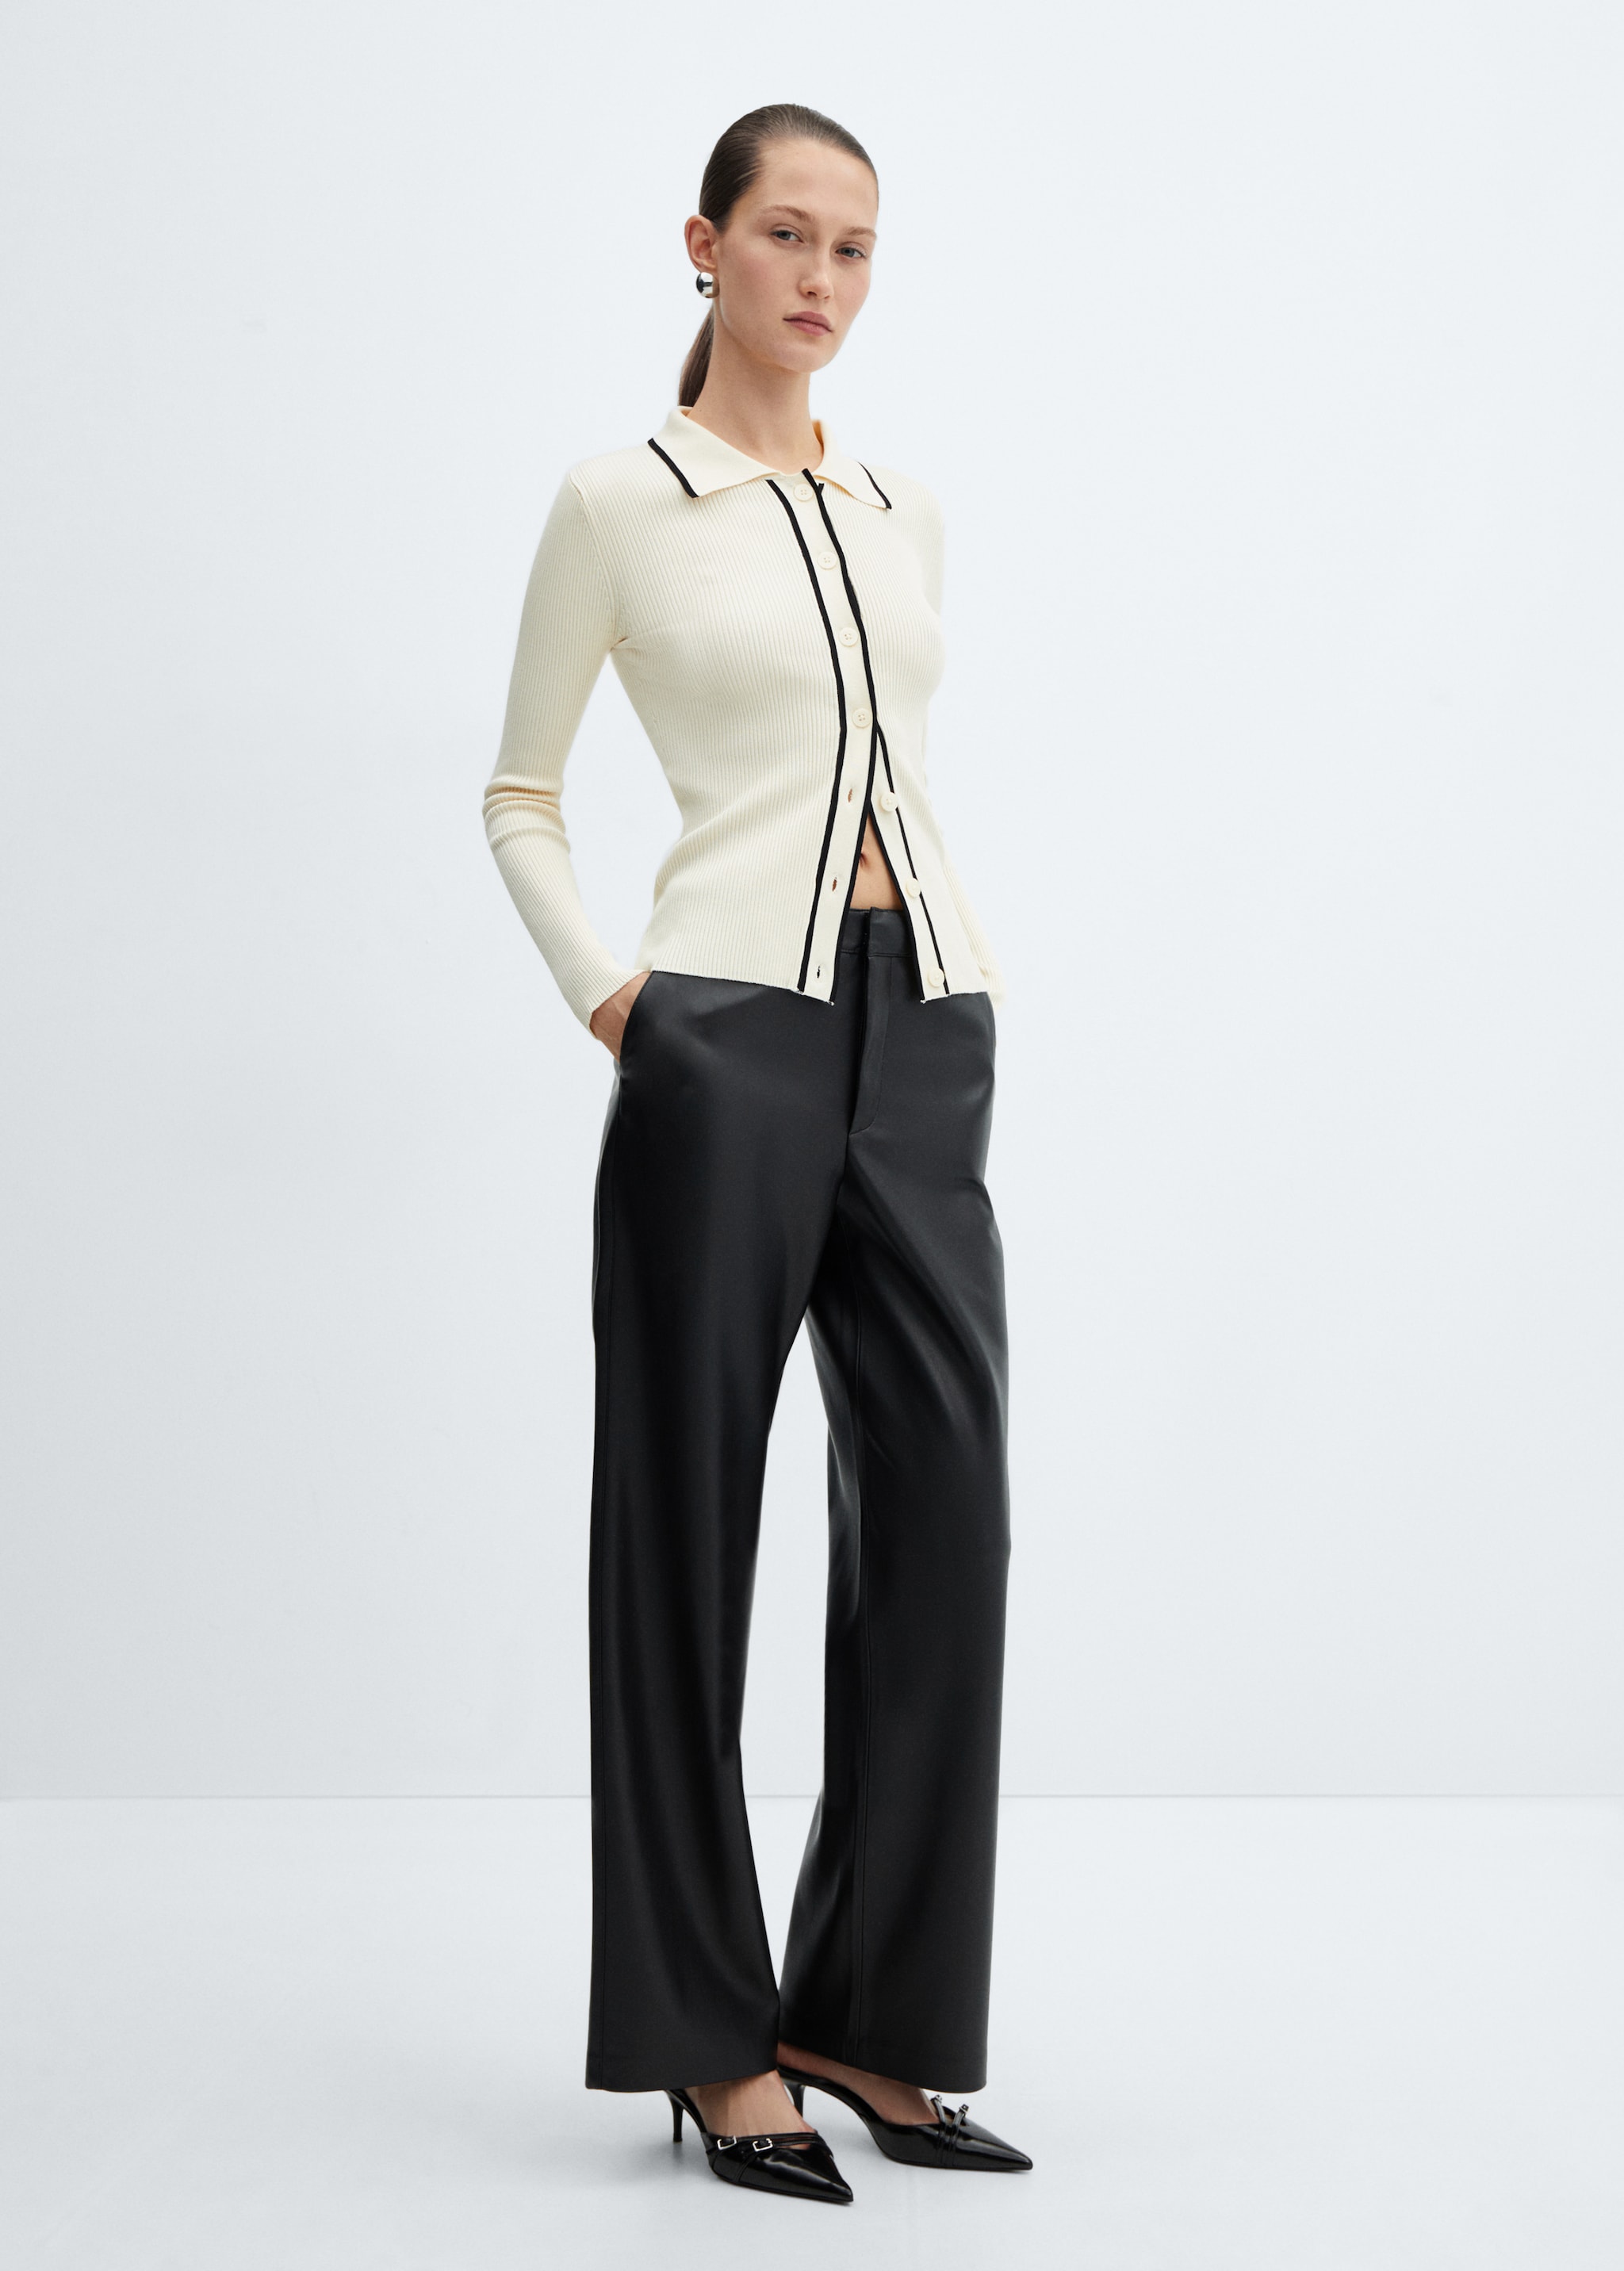 Leather effect high waist pant - General plane